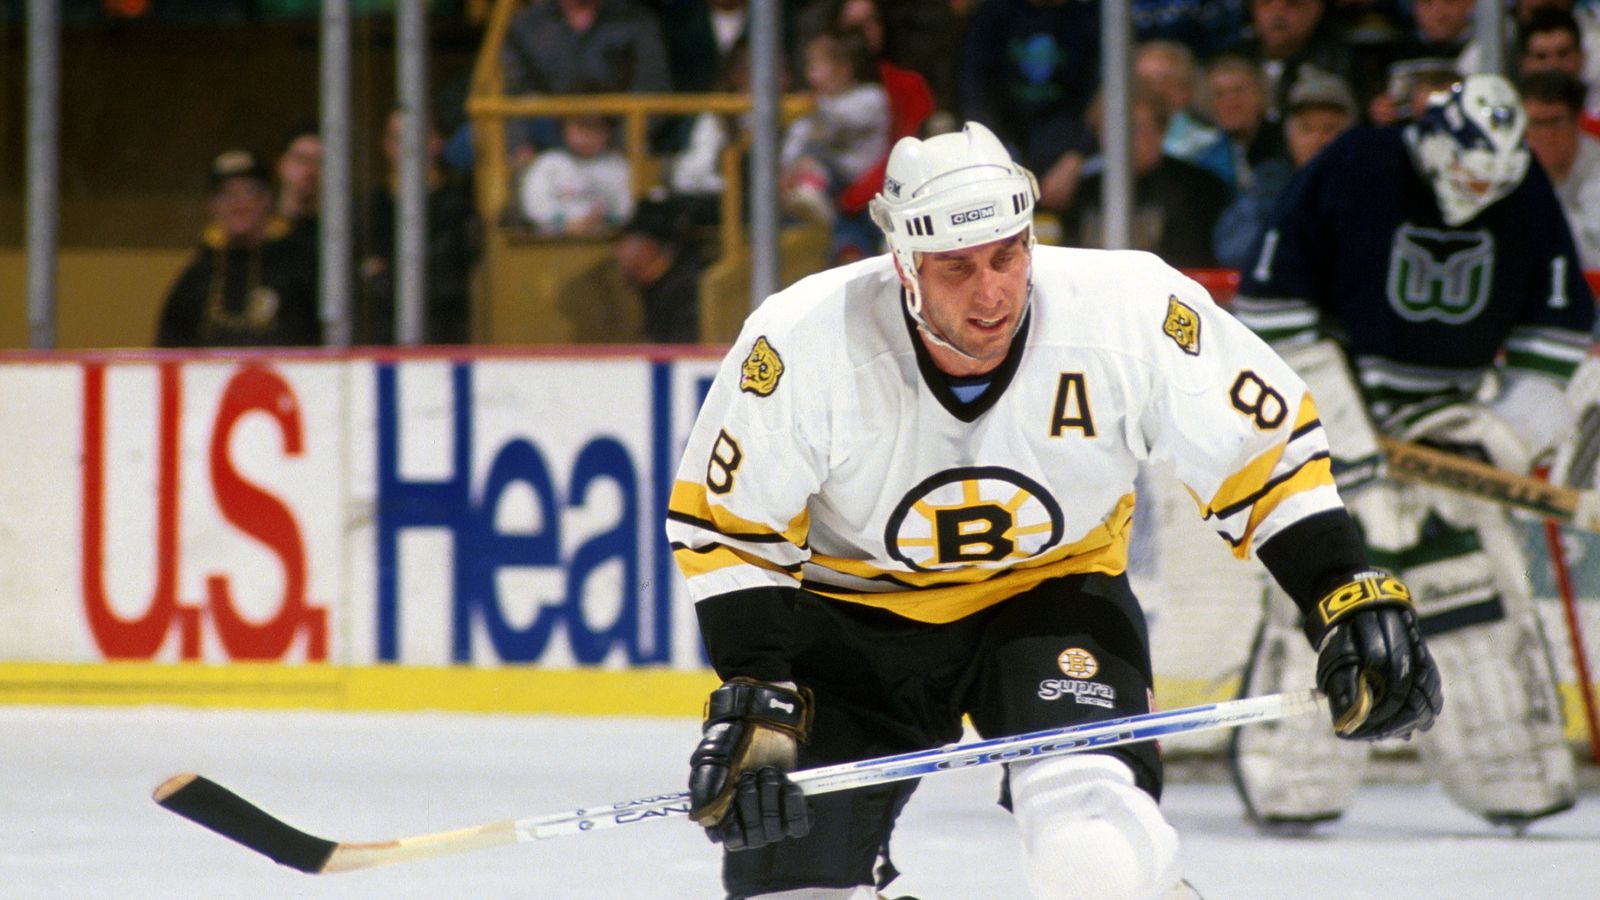 Cam Neely of the Eastern Conference and the Boston Bruins is